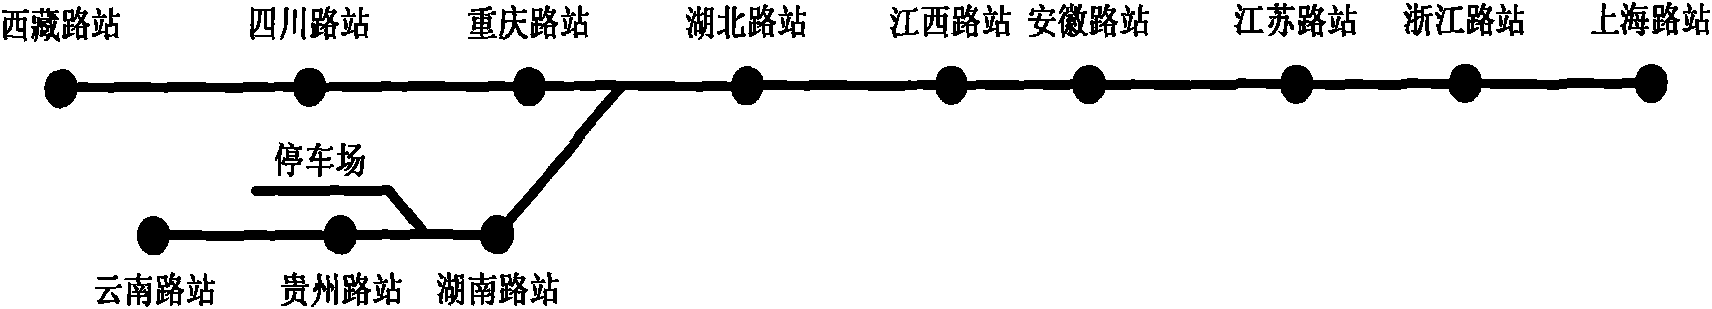 Display method of operating condition of Y-shaped urban railway transport routes